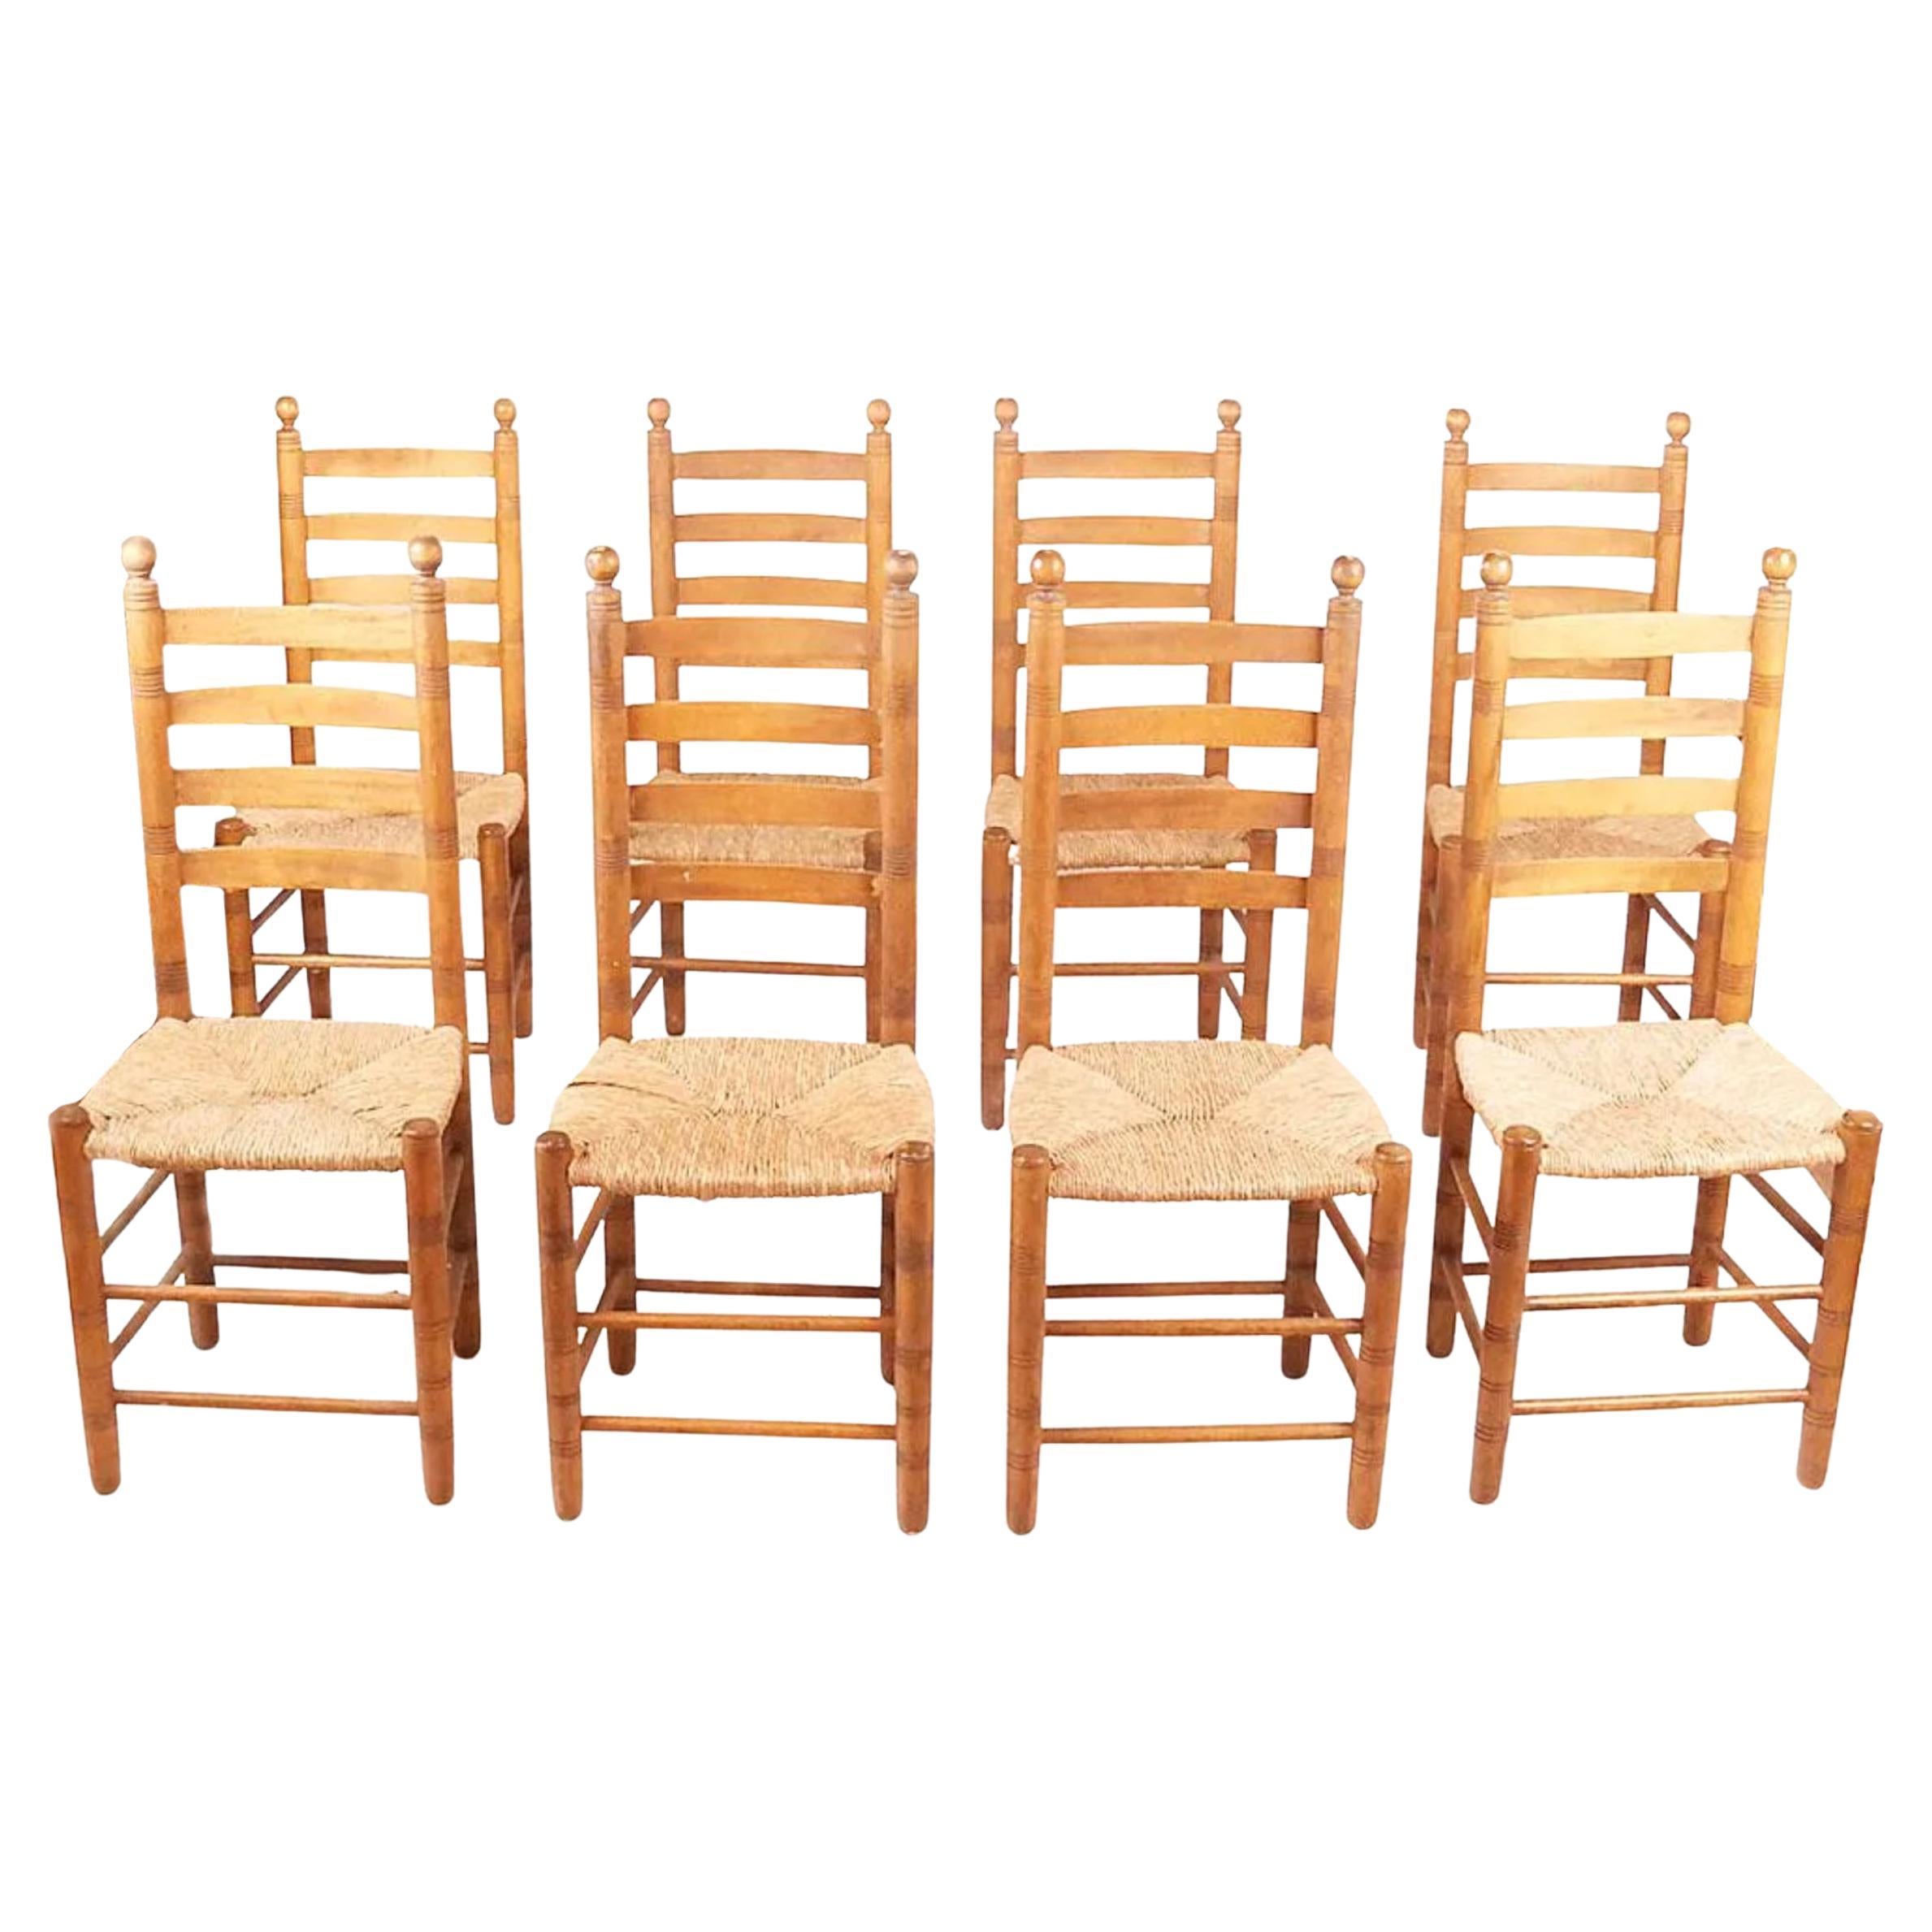 Superb Early American Shaker Style High Back Chairs Set of 8